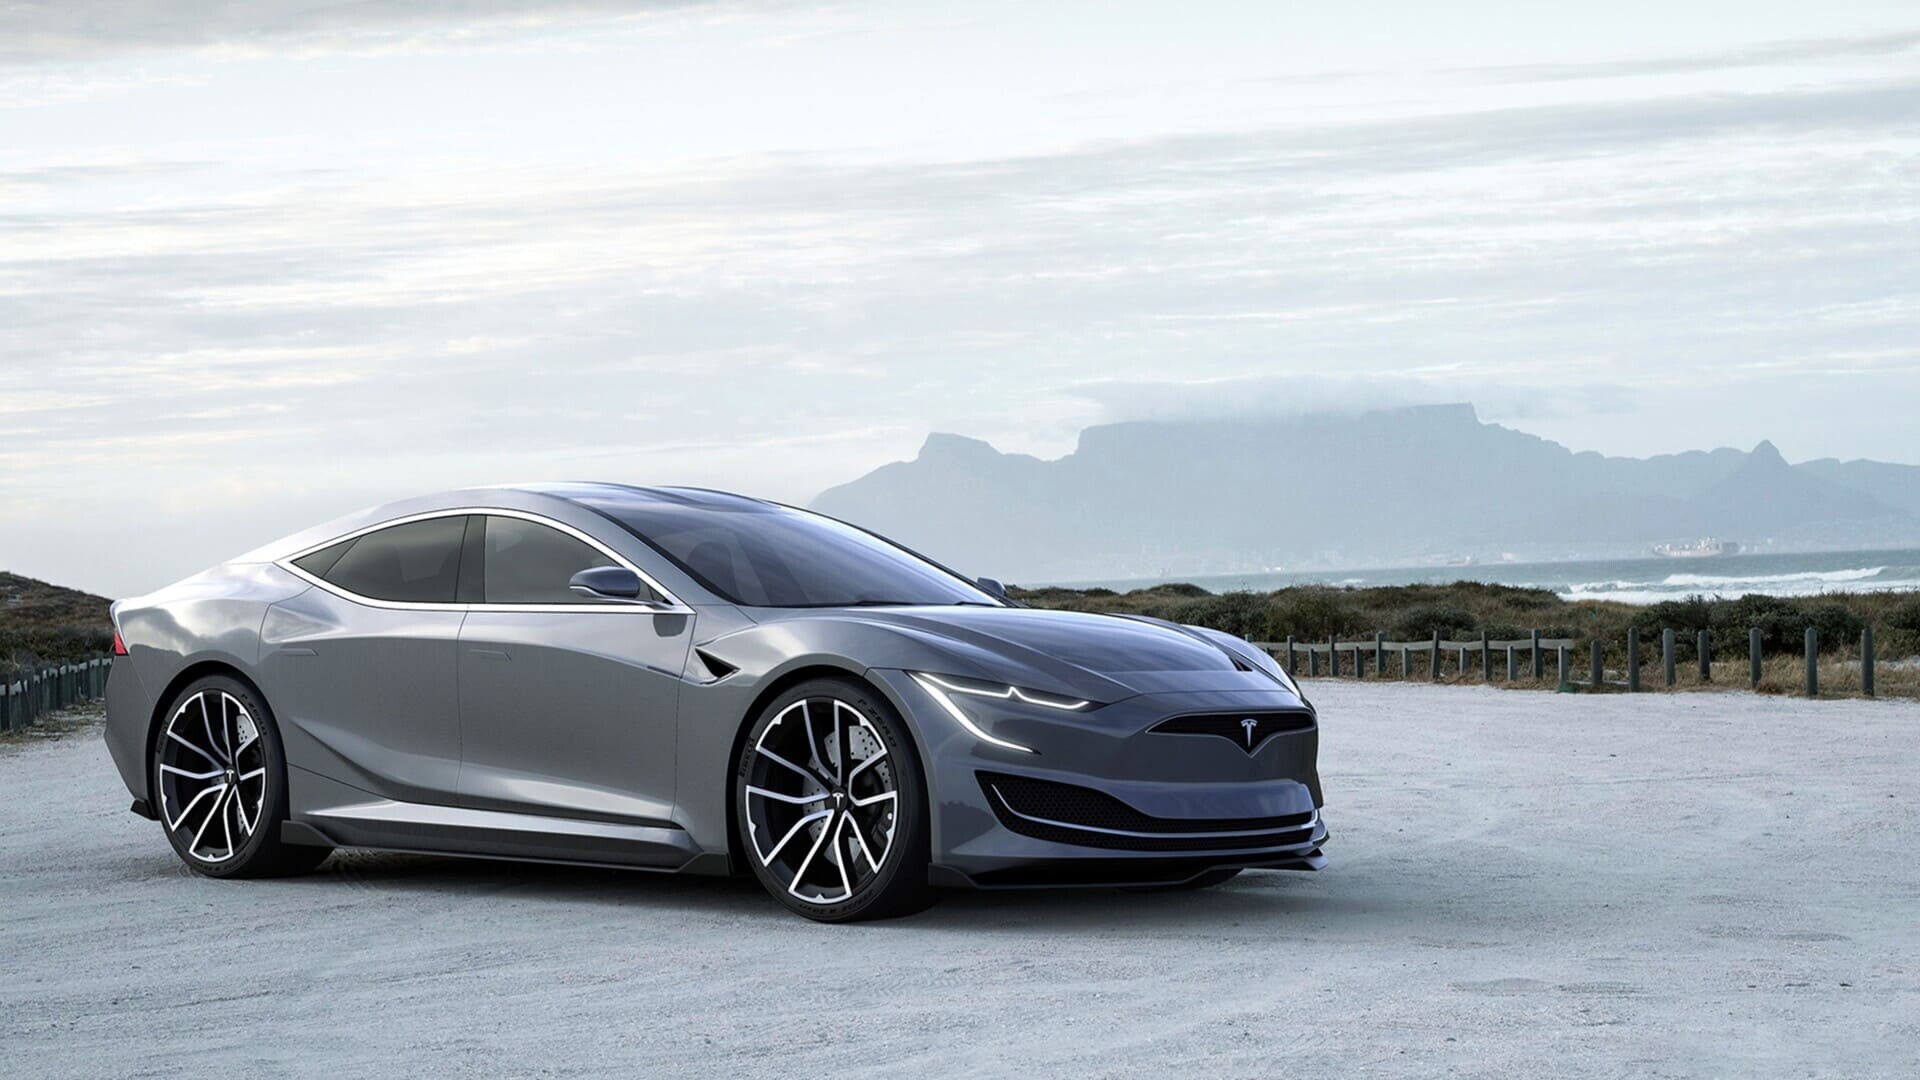 Tesla: Ranked as the most valuable automotive brand worldwide as of June 2022. 1920x1080 Full HD Wallpaper.